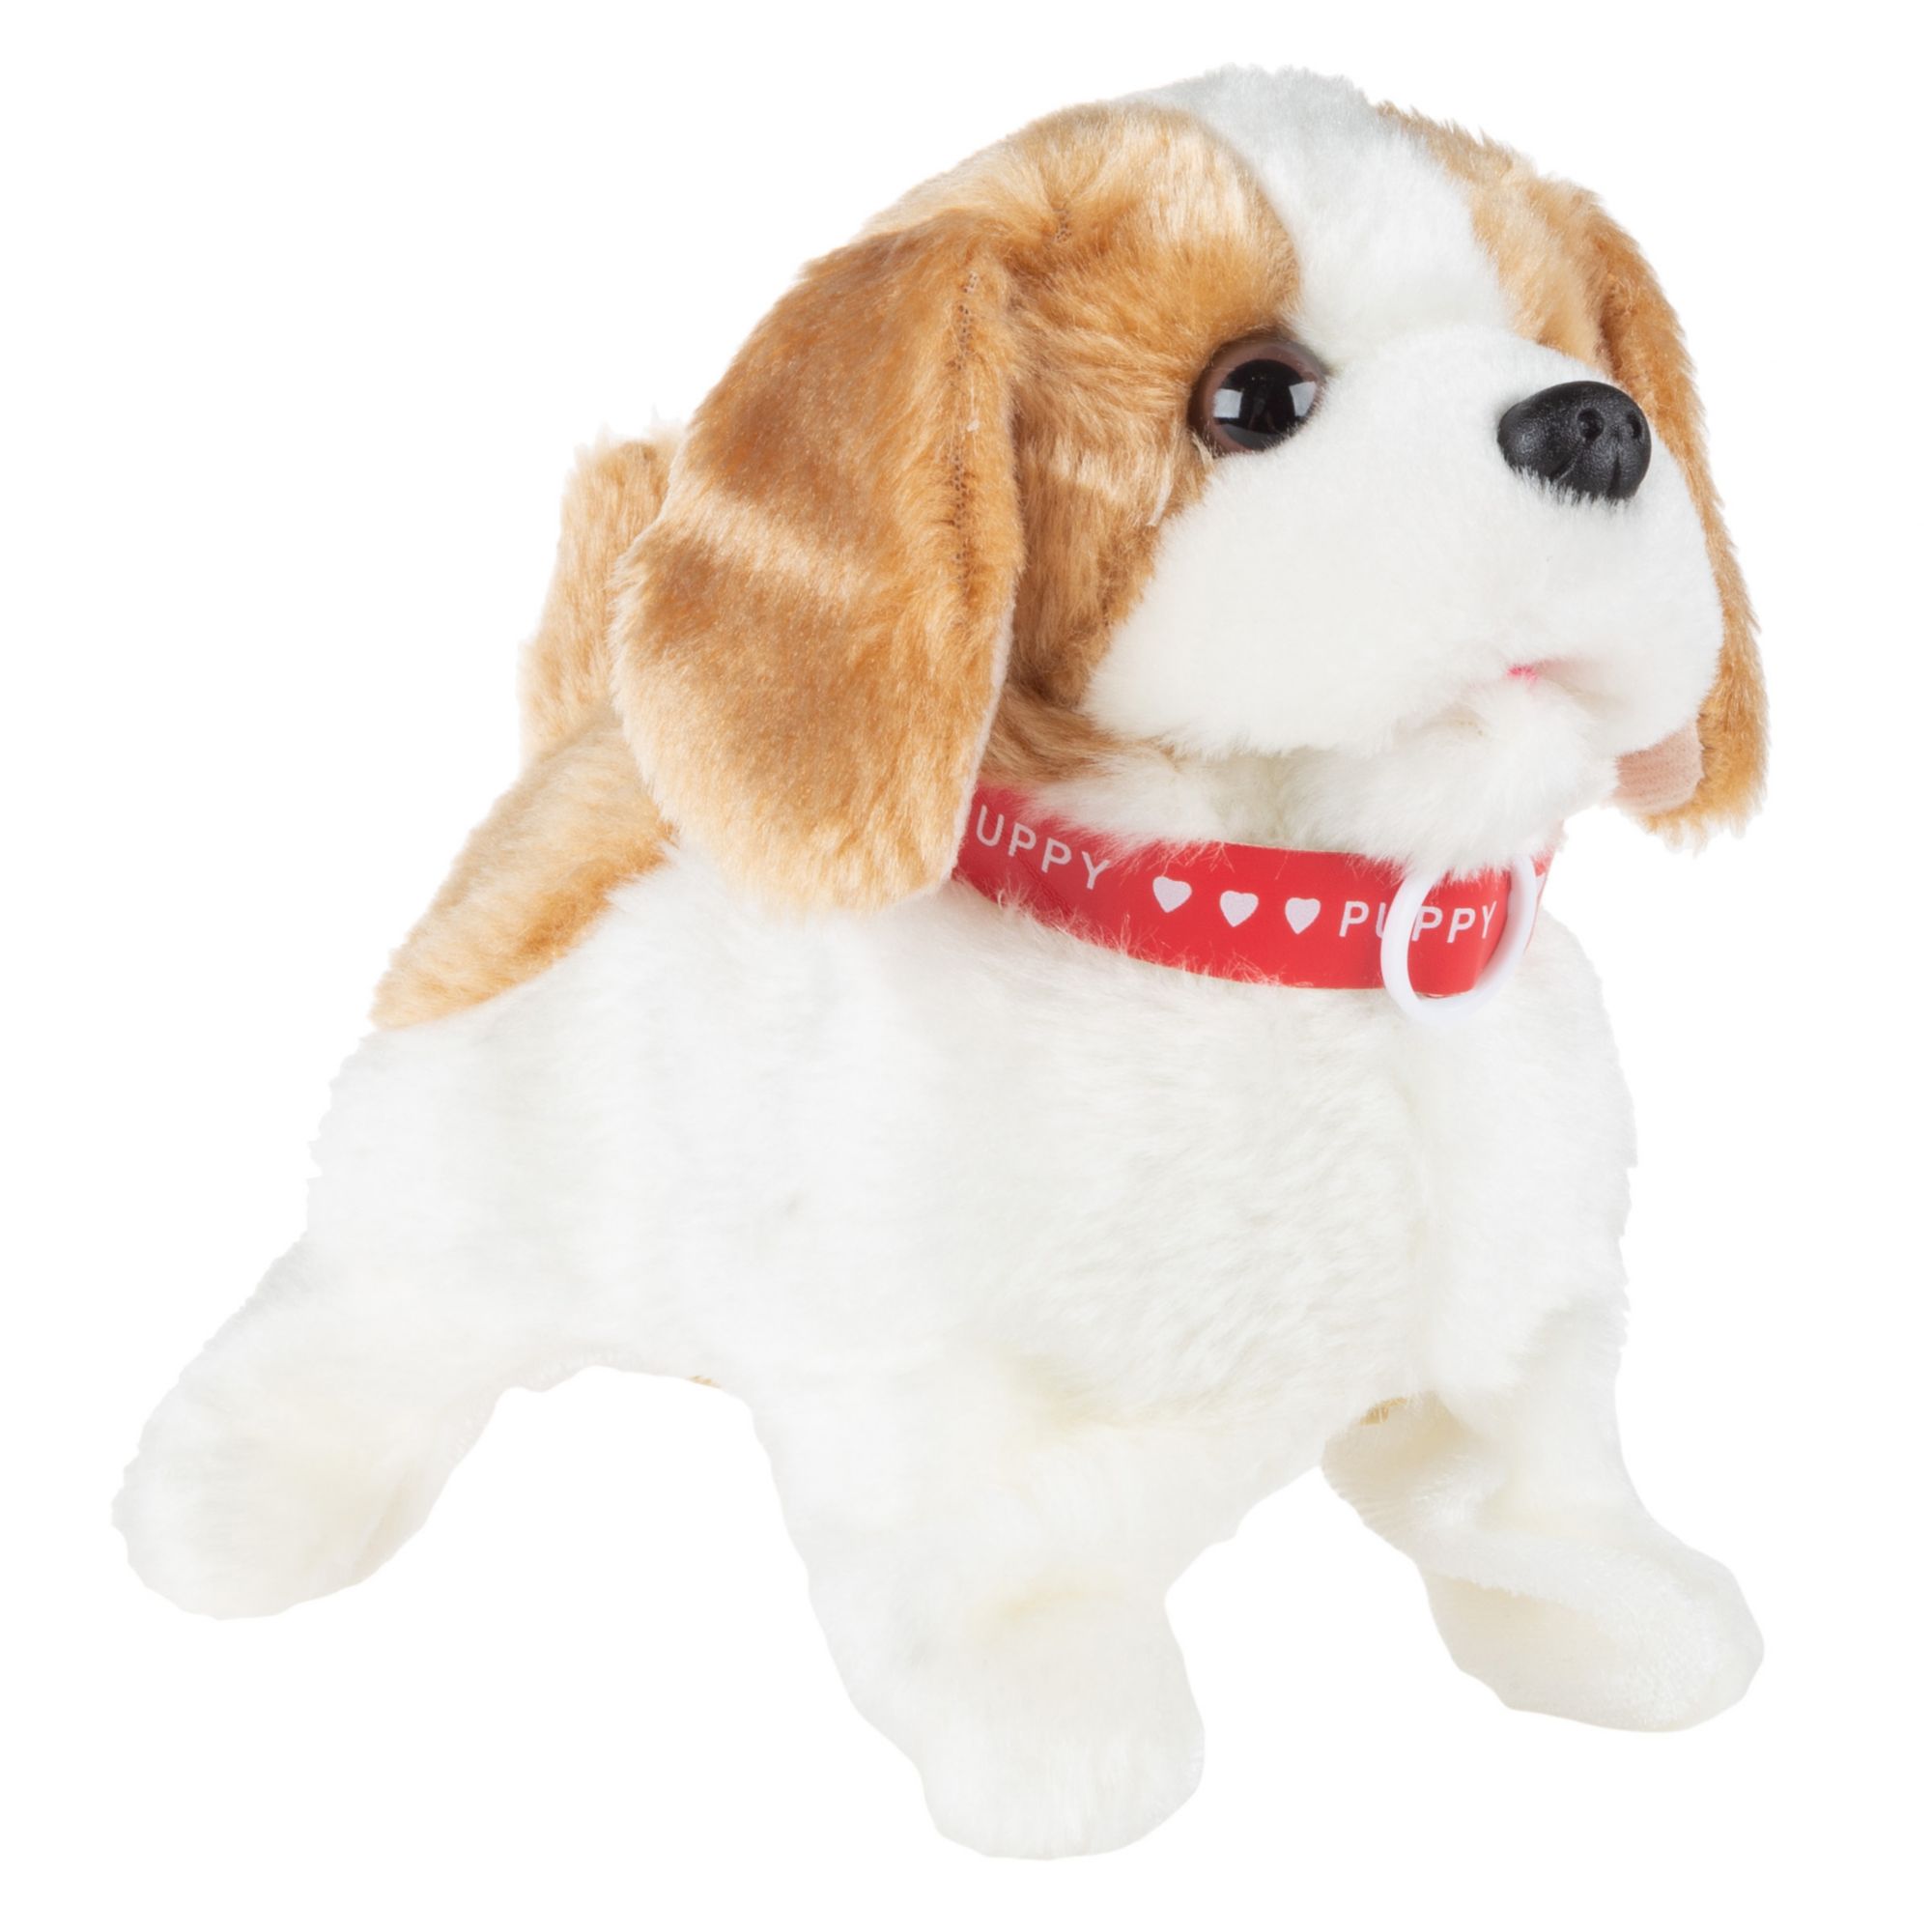 P.L.A.Y. Barking Brunch Pup's Pastry Dog Toy